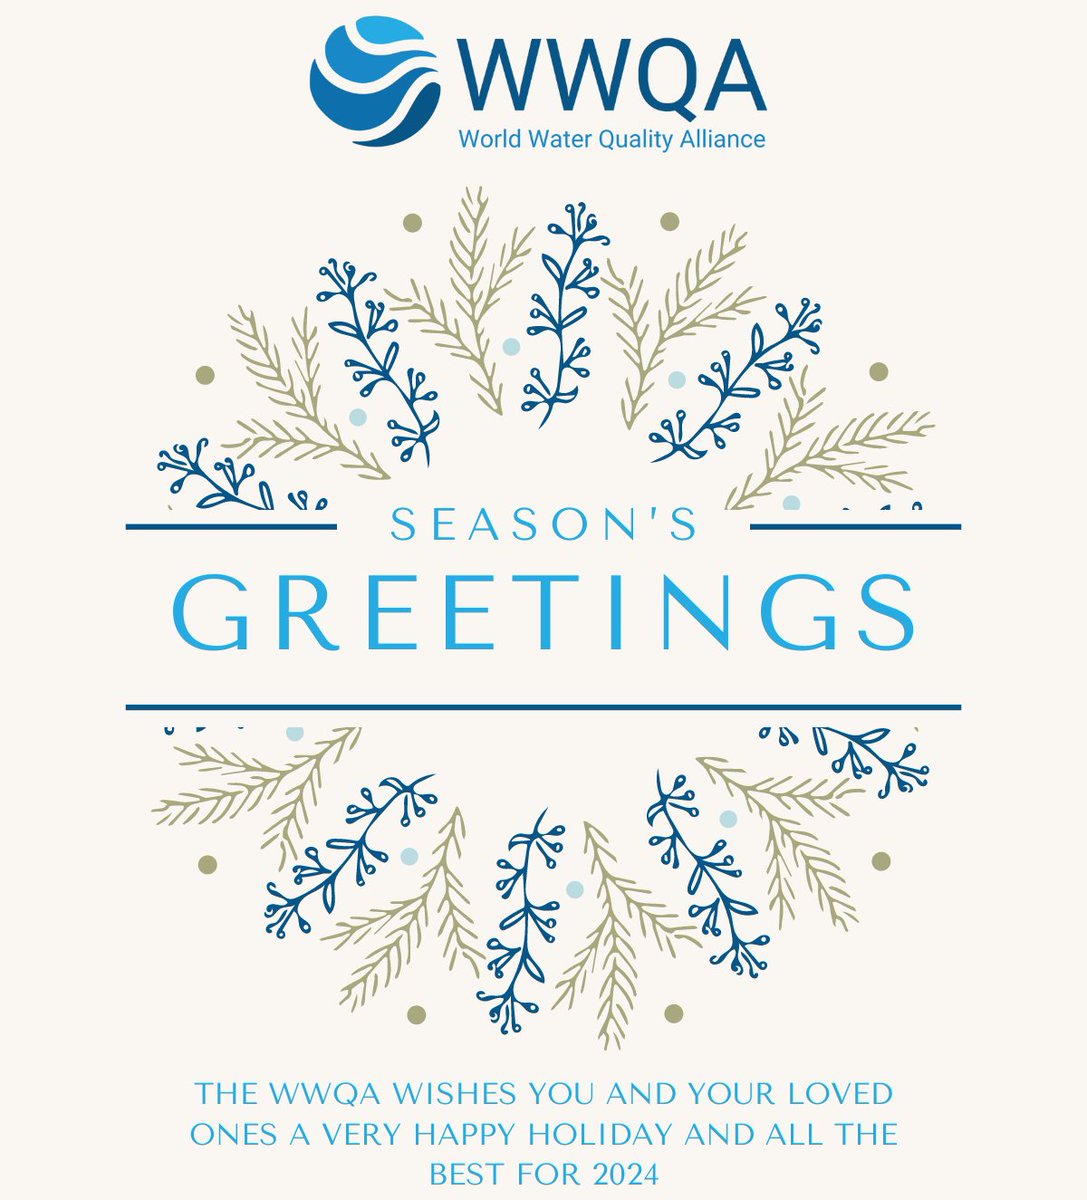 Wishing joy, laughter, and cherished moments to our valued World Water Quality Alliance community! Grateful for 2023's growth, collaboration, and dedication to improving water quality. Let's step into 2024 with a commitment to safeguarding water resources. #WWQA #HappyHolidays